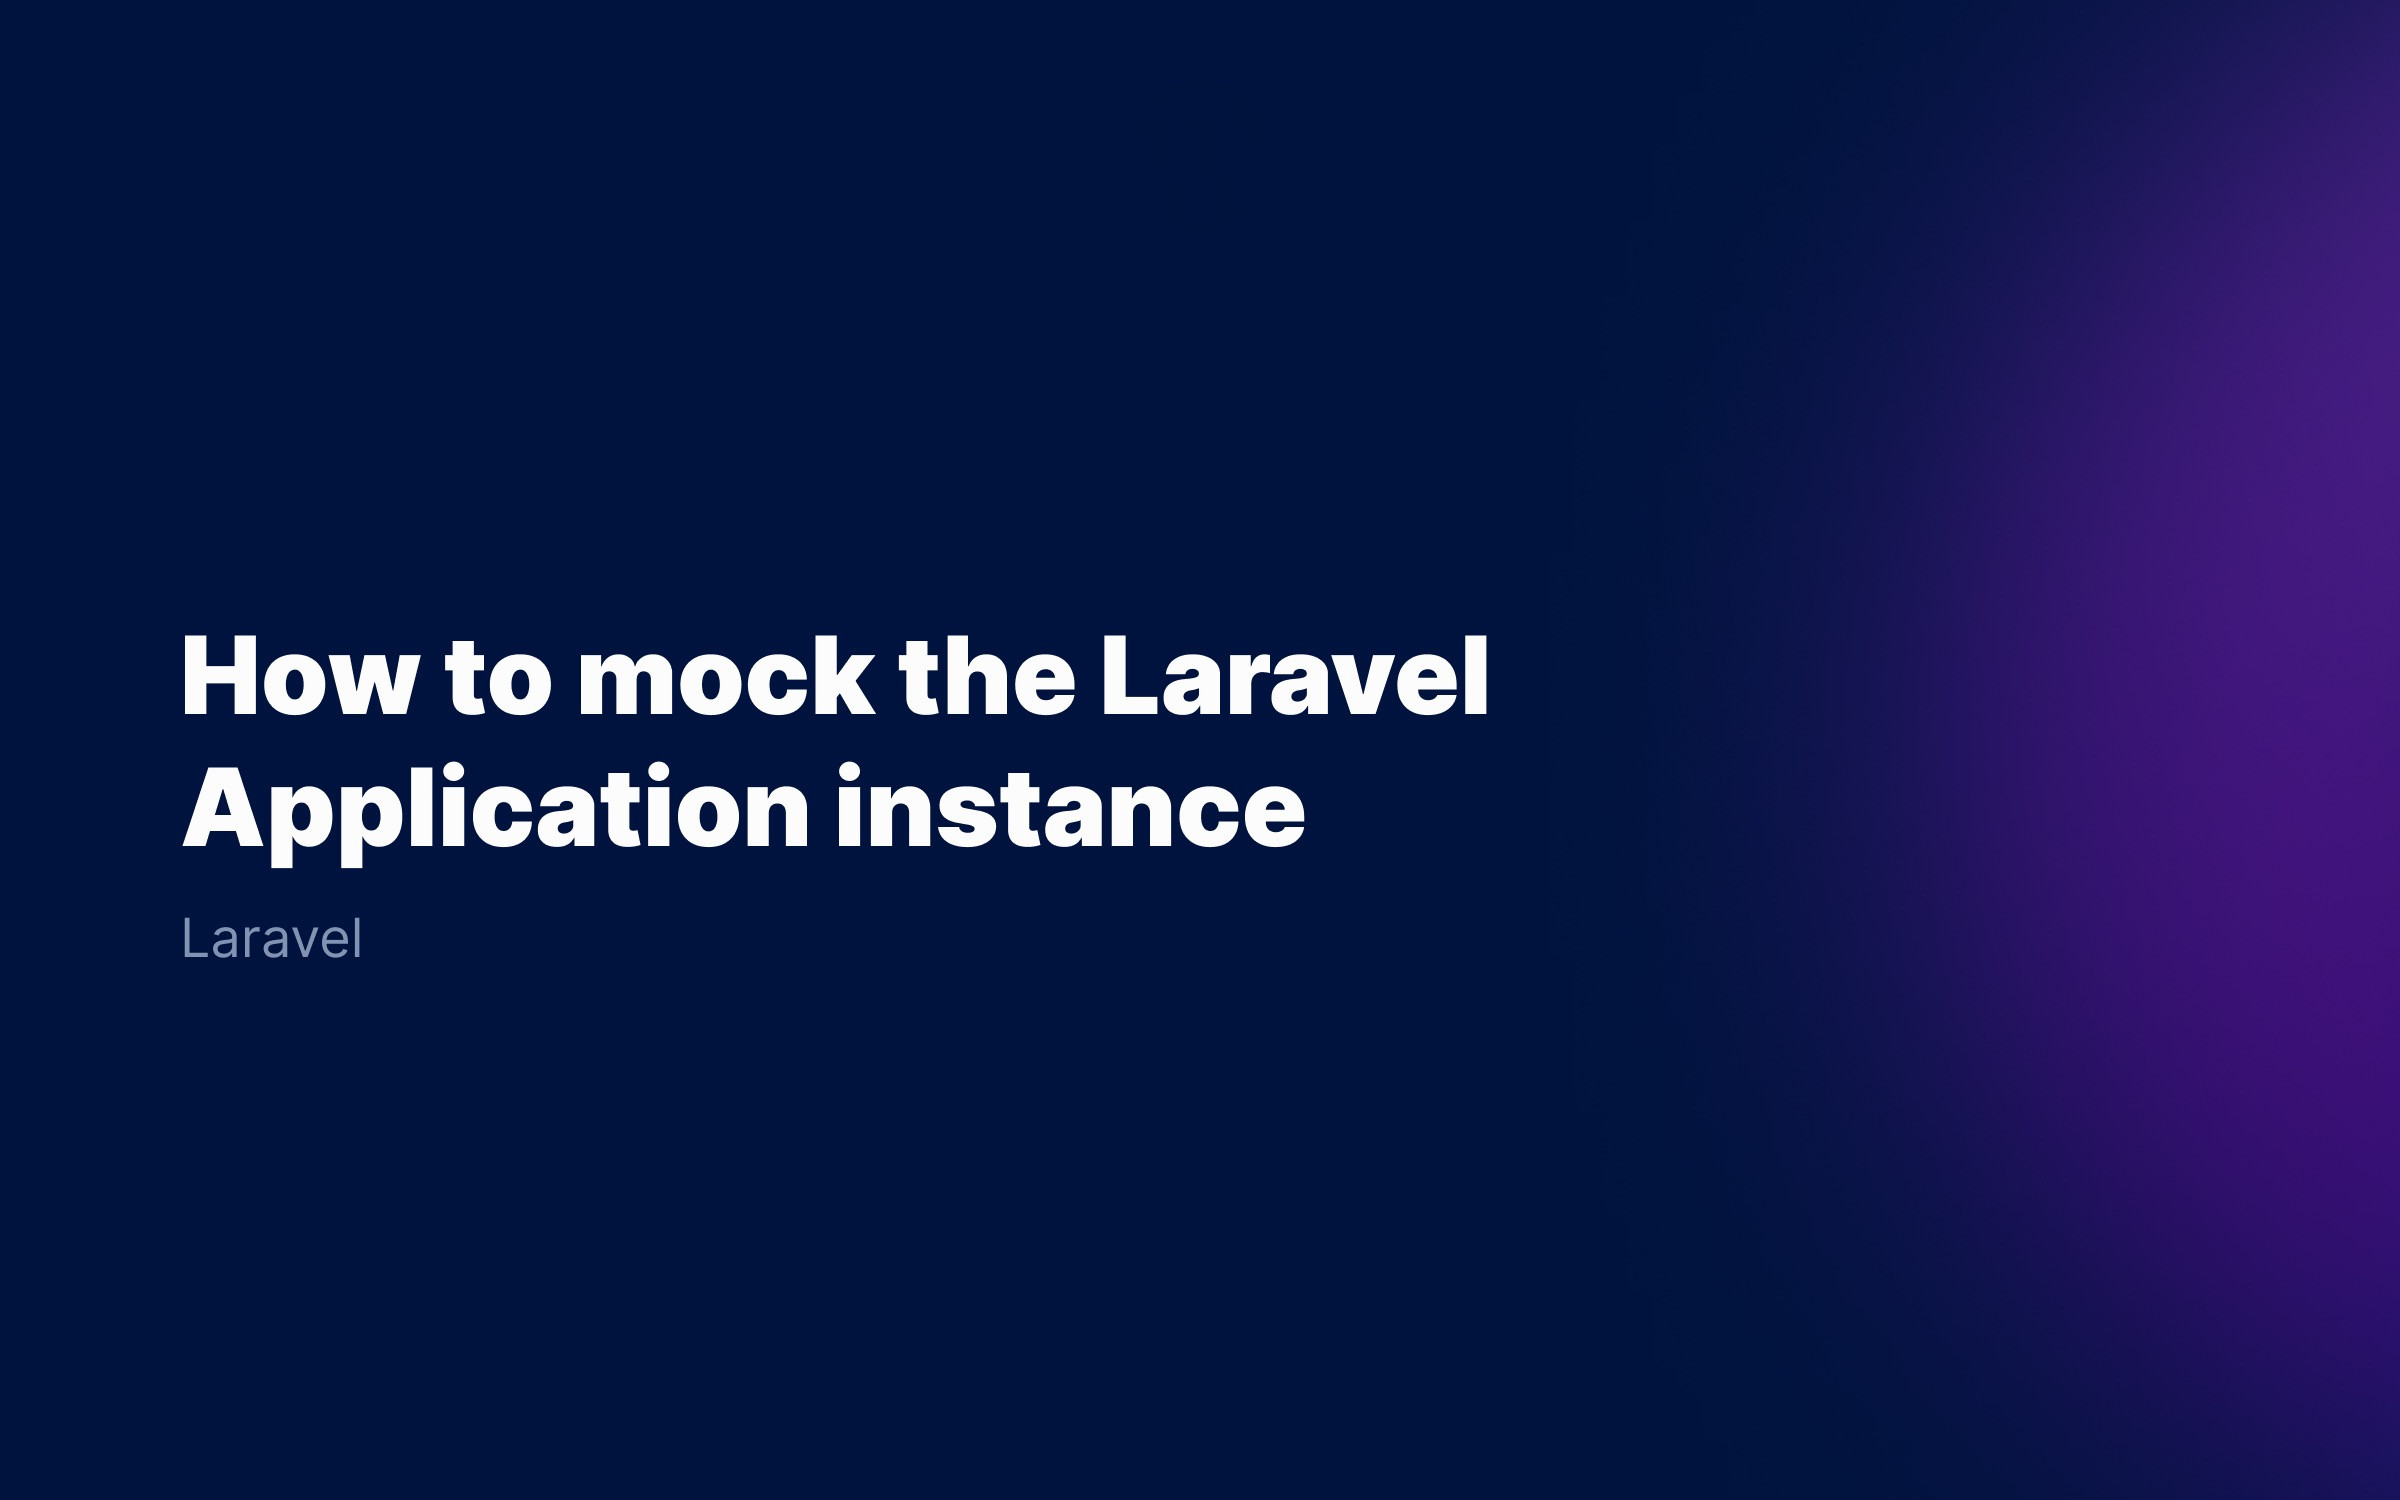 How to mock the Laravel Application instance